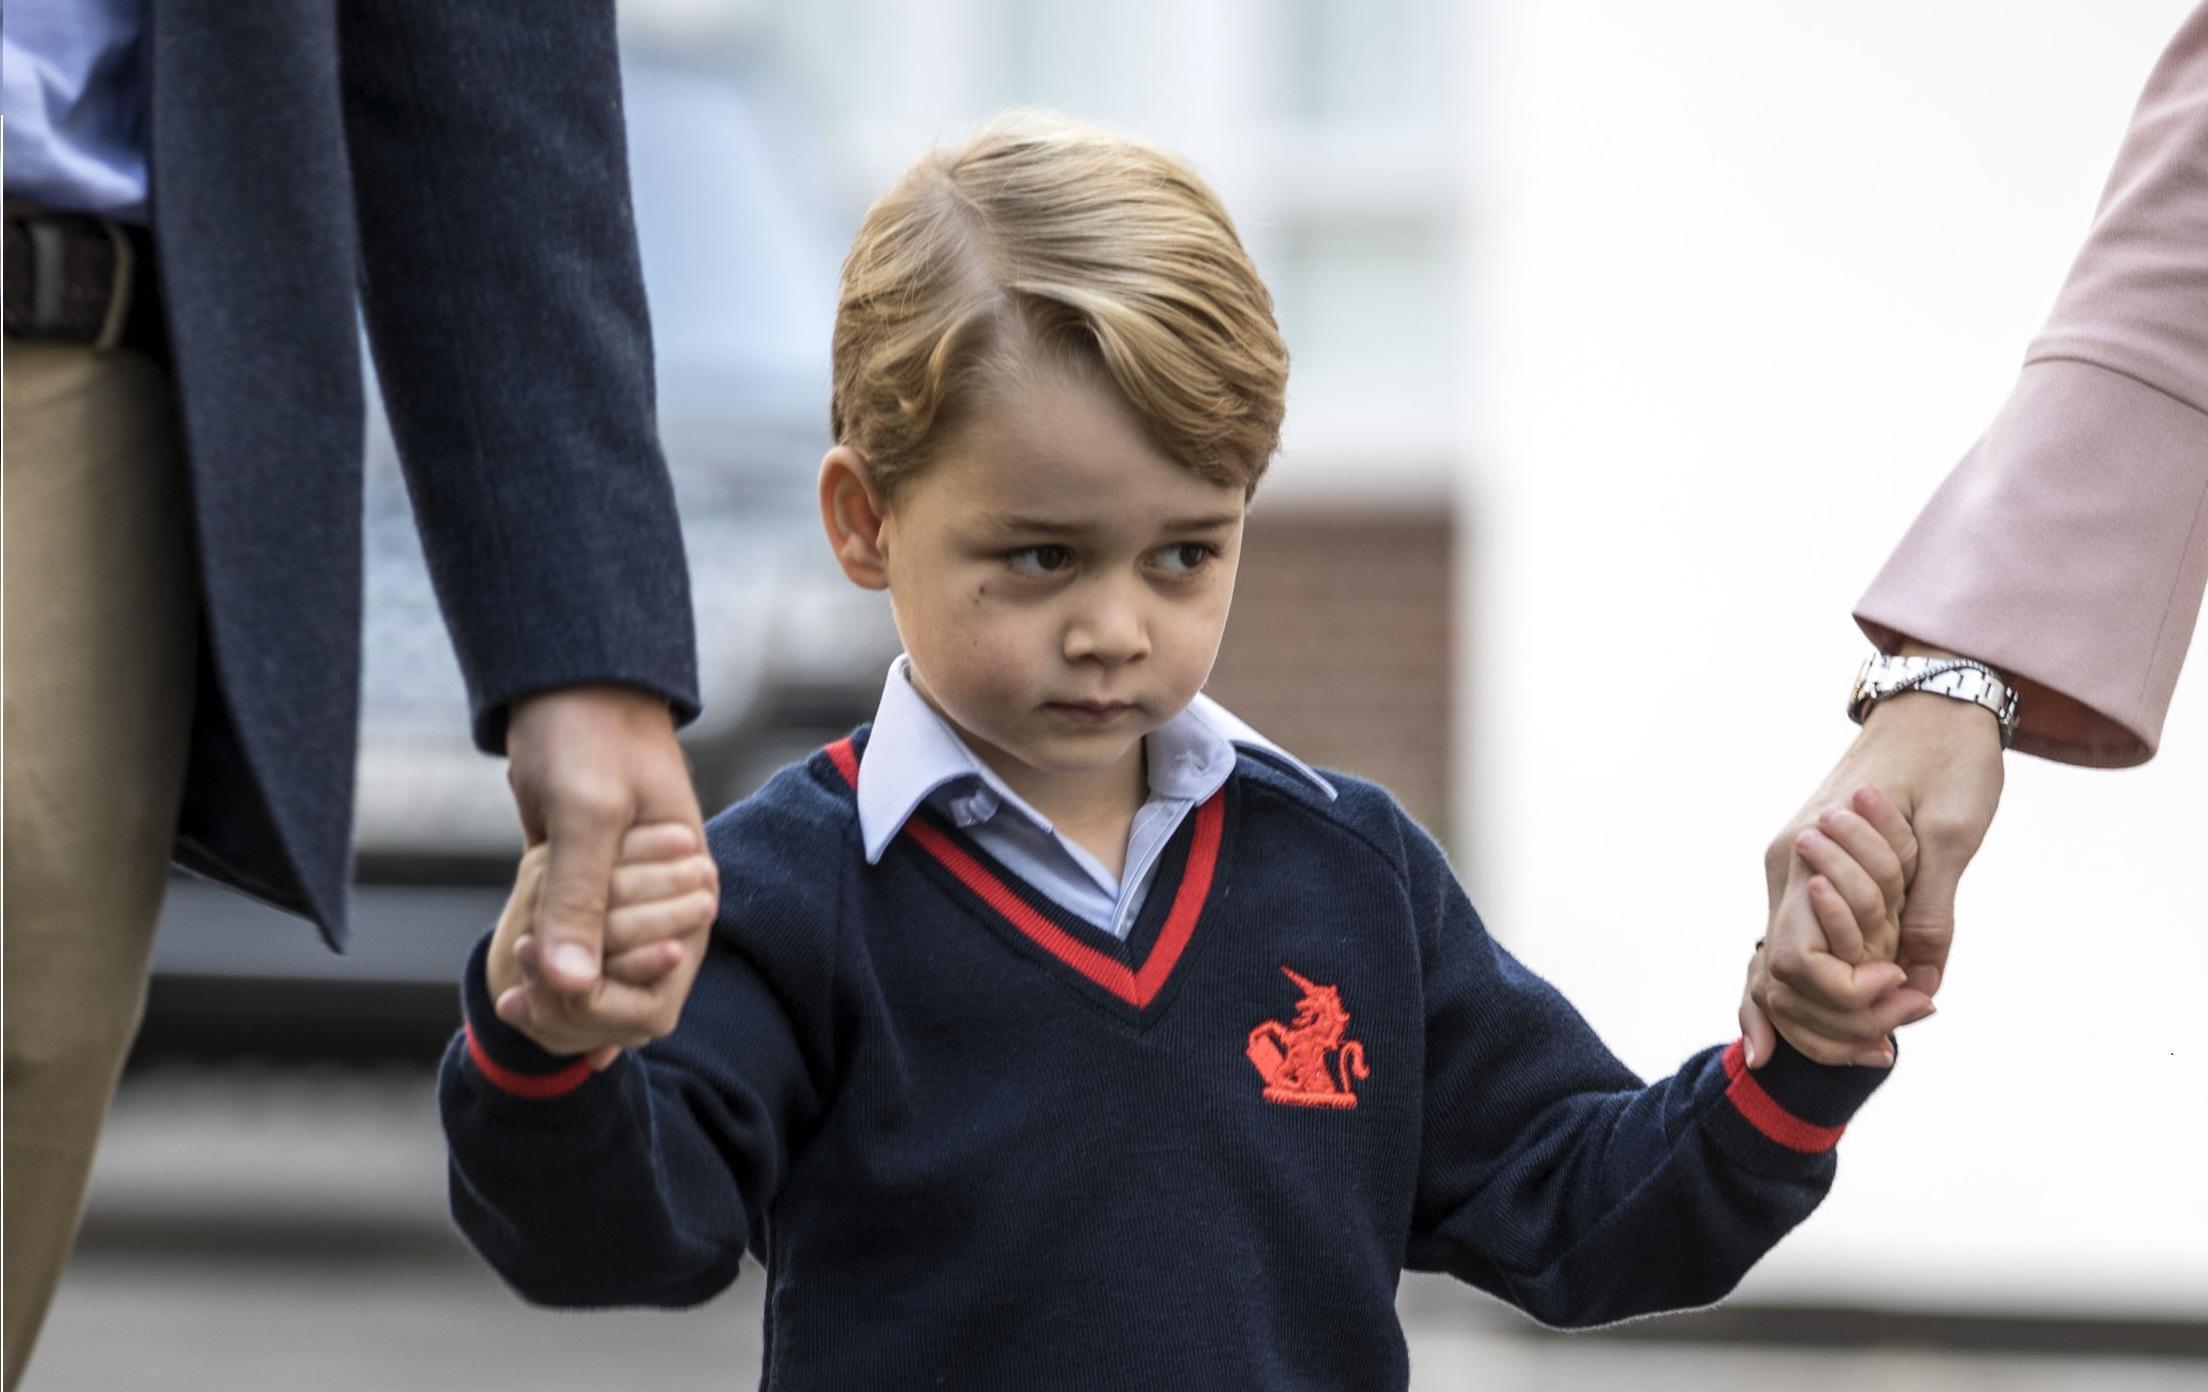 Ms Gibbins described Prince George as 'white privilege' in a comment on Facebook